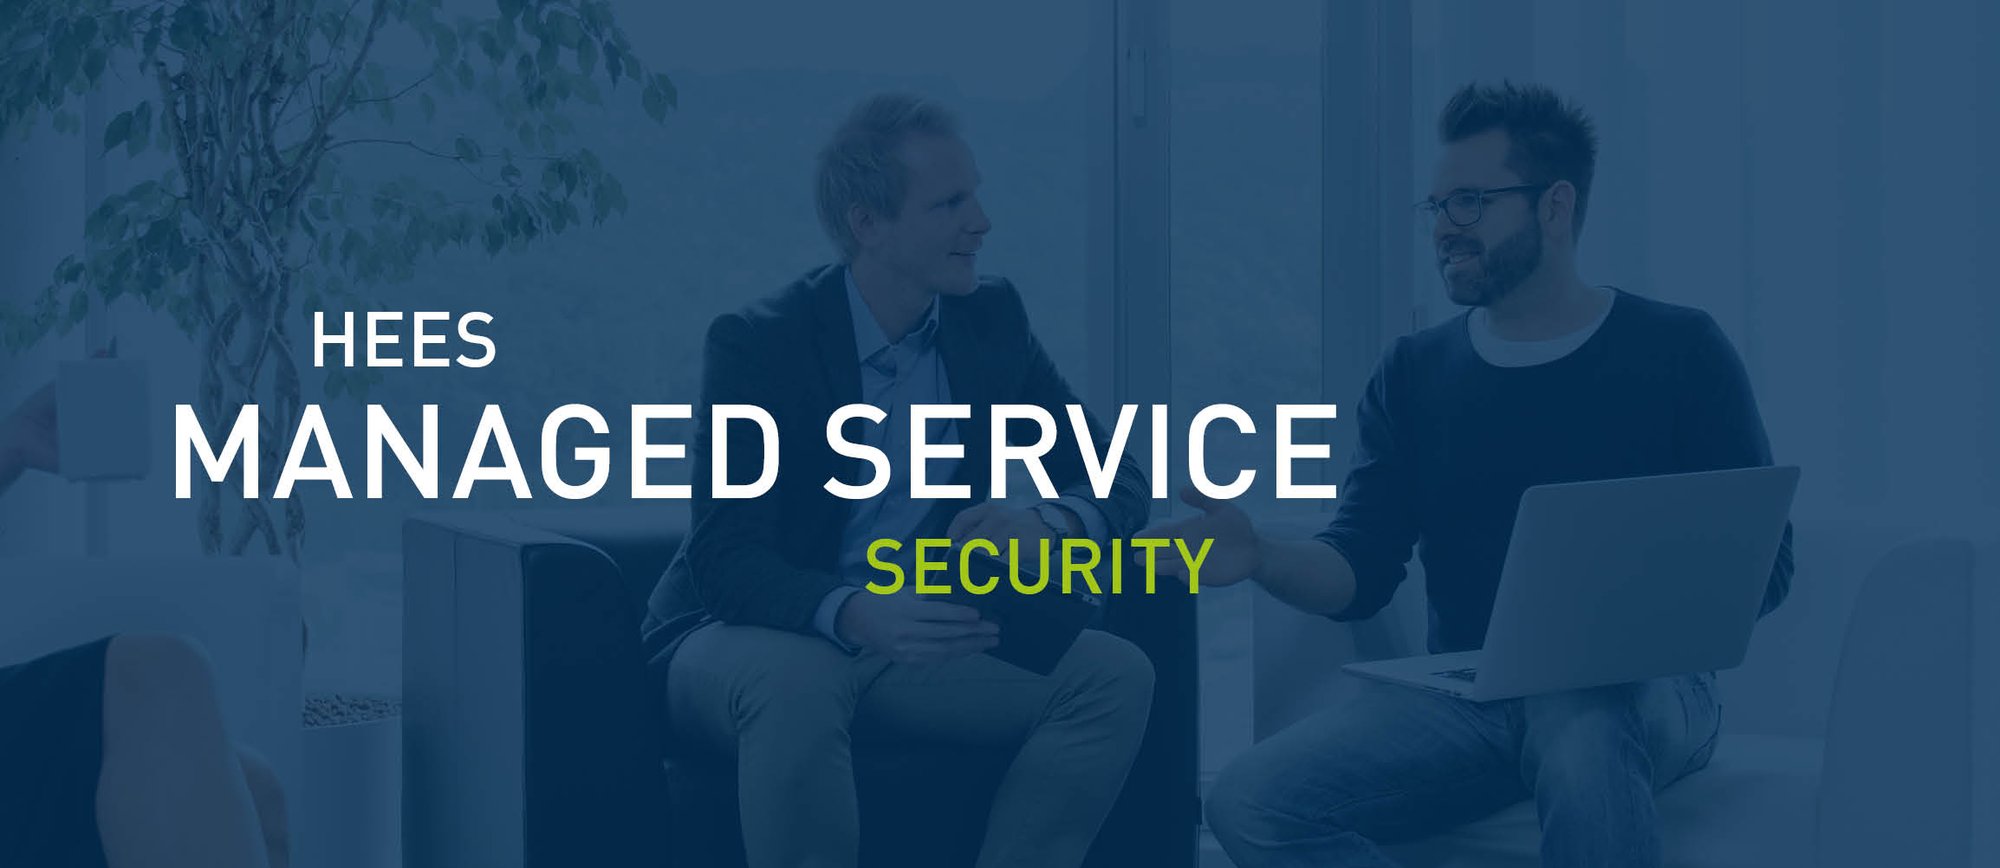 HEES Managed Services_Security_Banner